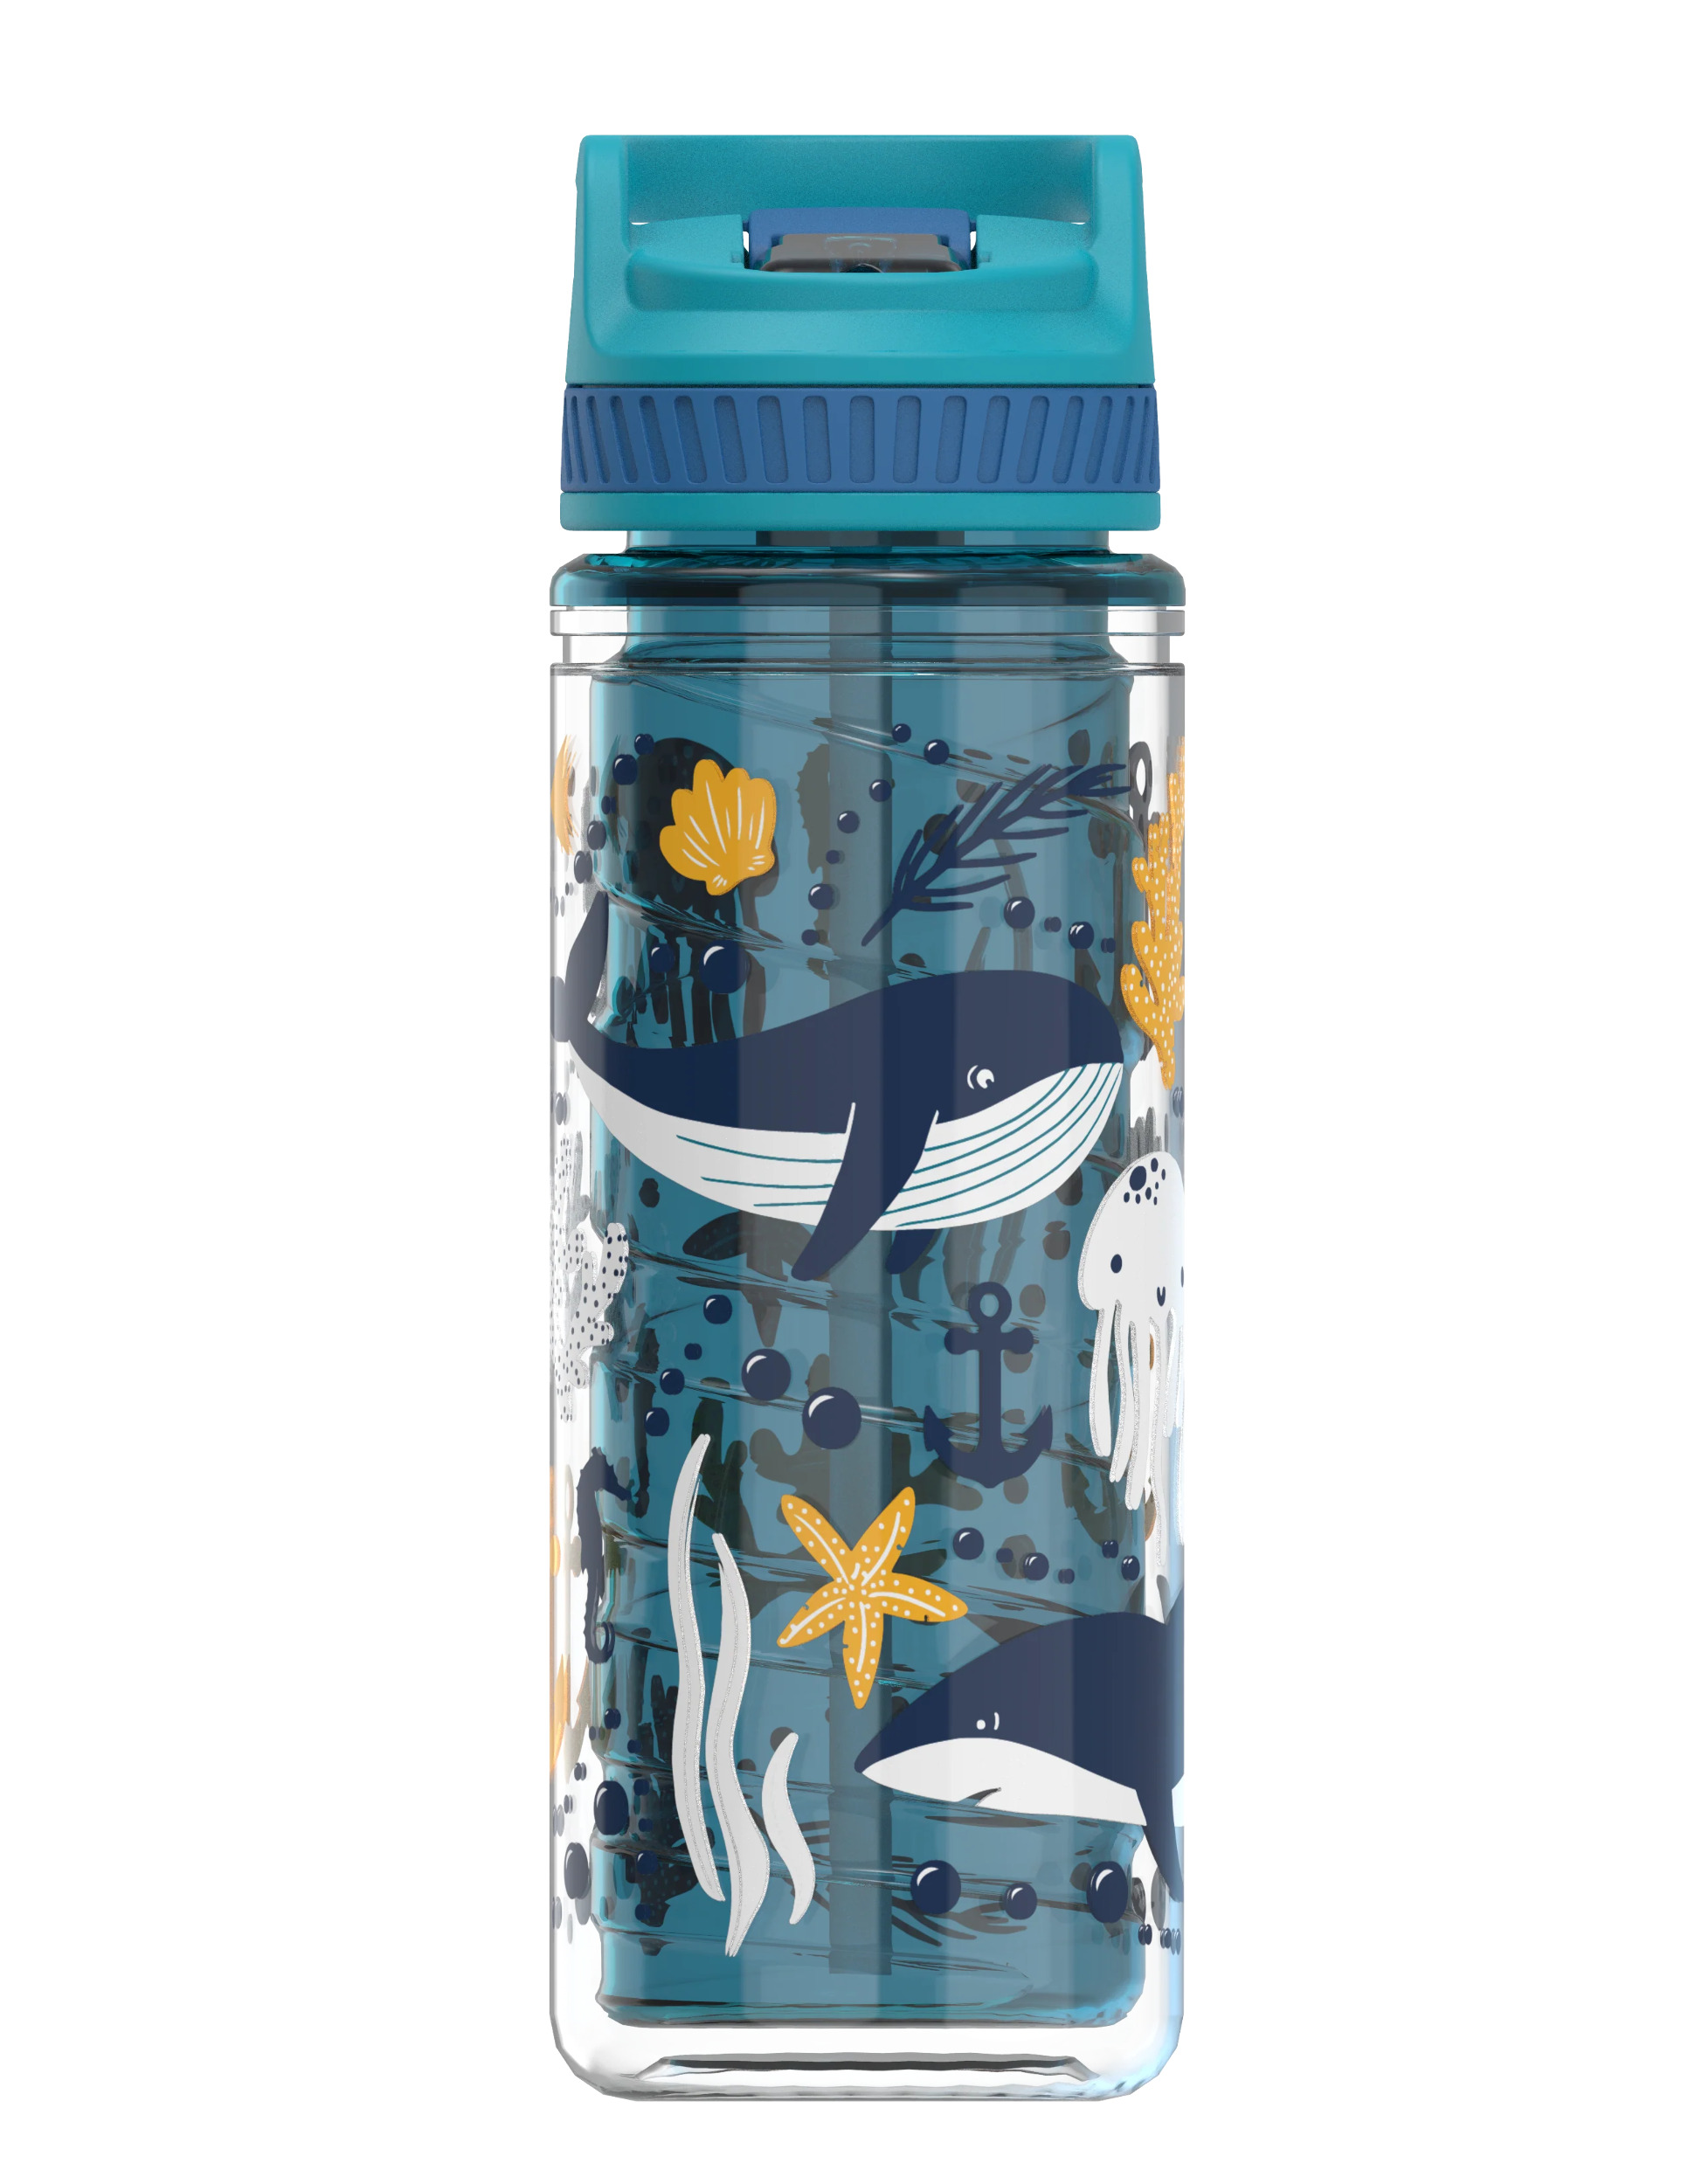 Cool Gear 2-Pack 16 oz Kid's Twist Water Bottle with Double Wall, Sipper Lid and Finger Loop Cap with Printed Design | Great for School, Sports, Outdoors, and More - Cellestial/ Sea Life - image 3 of 3